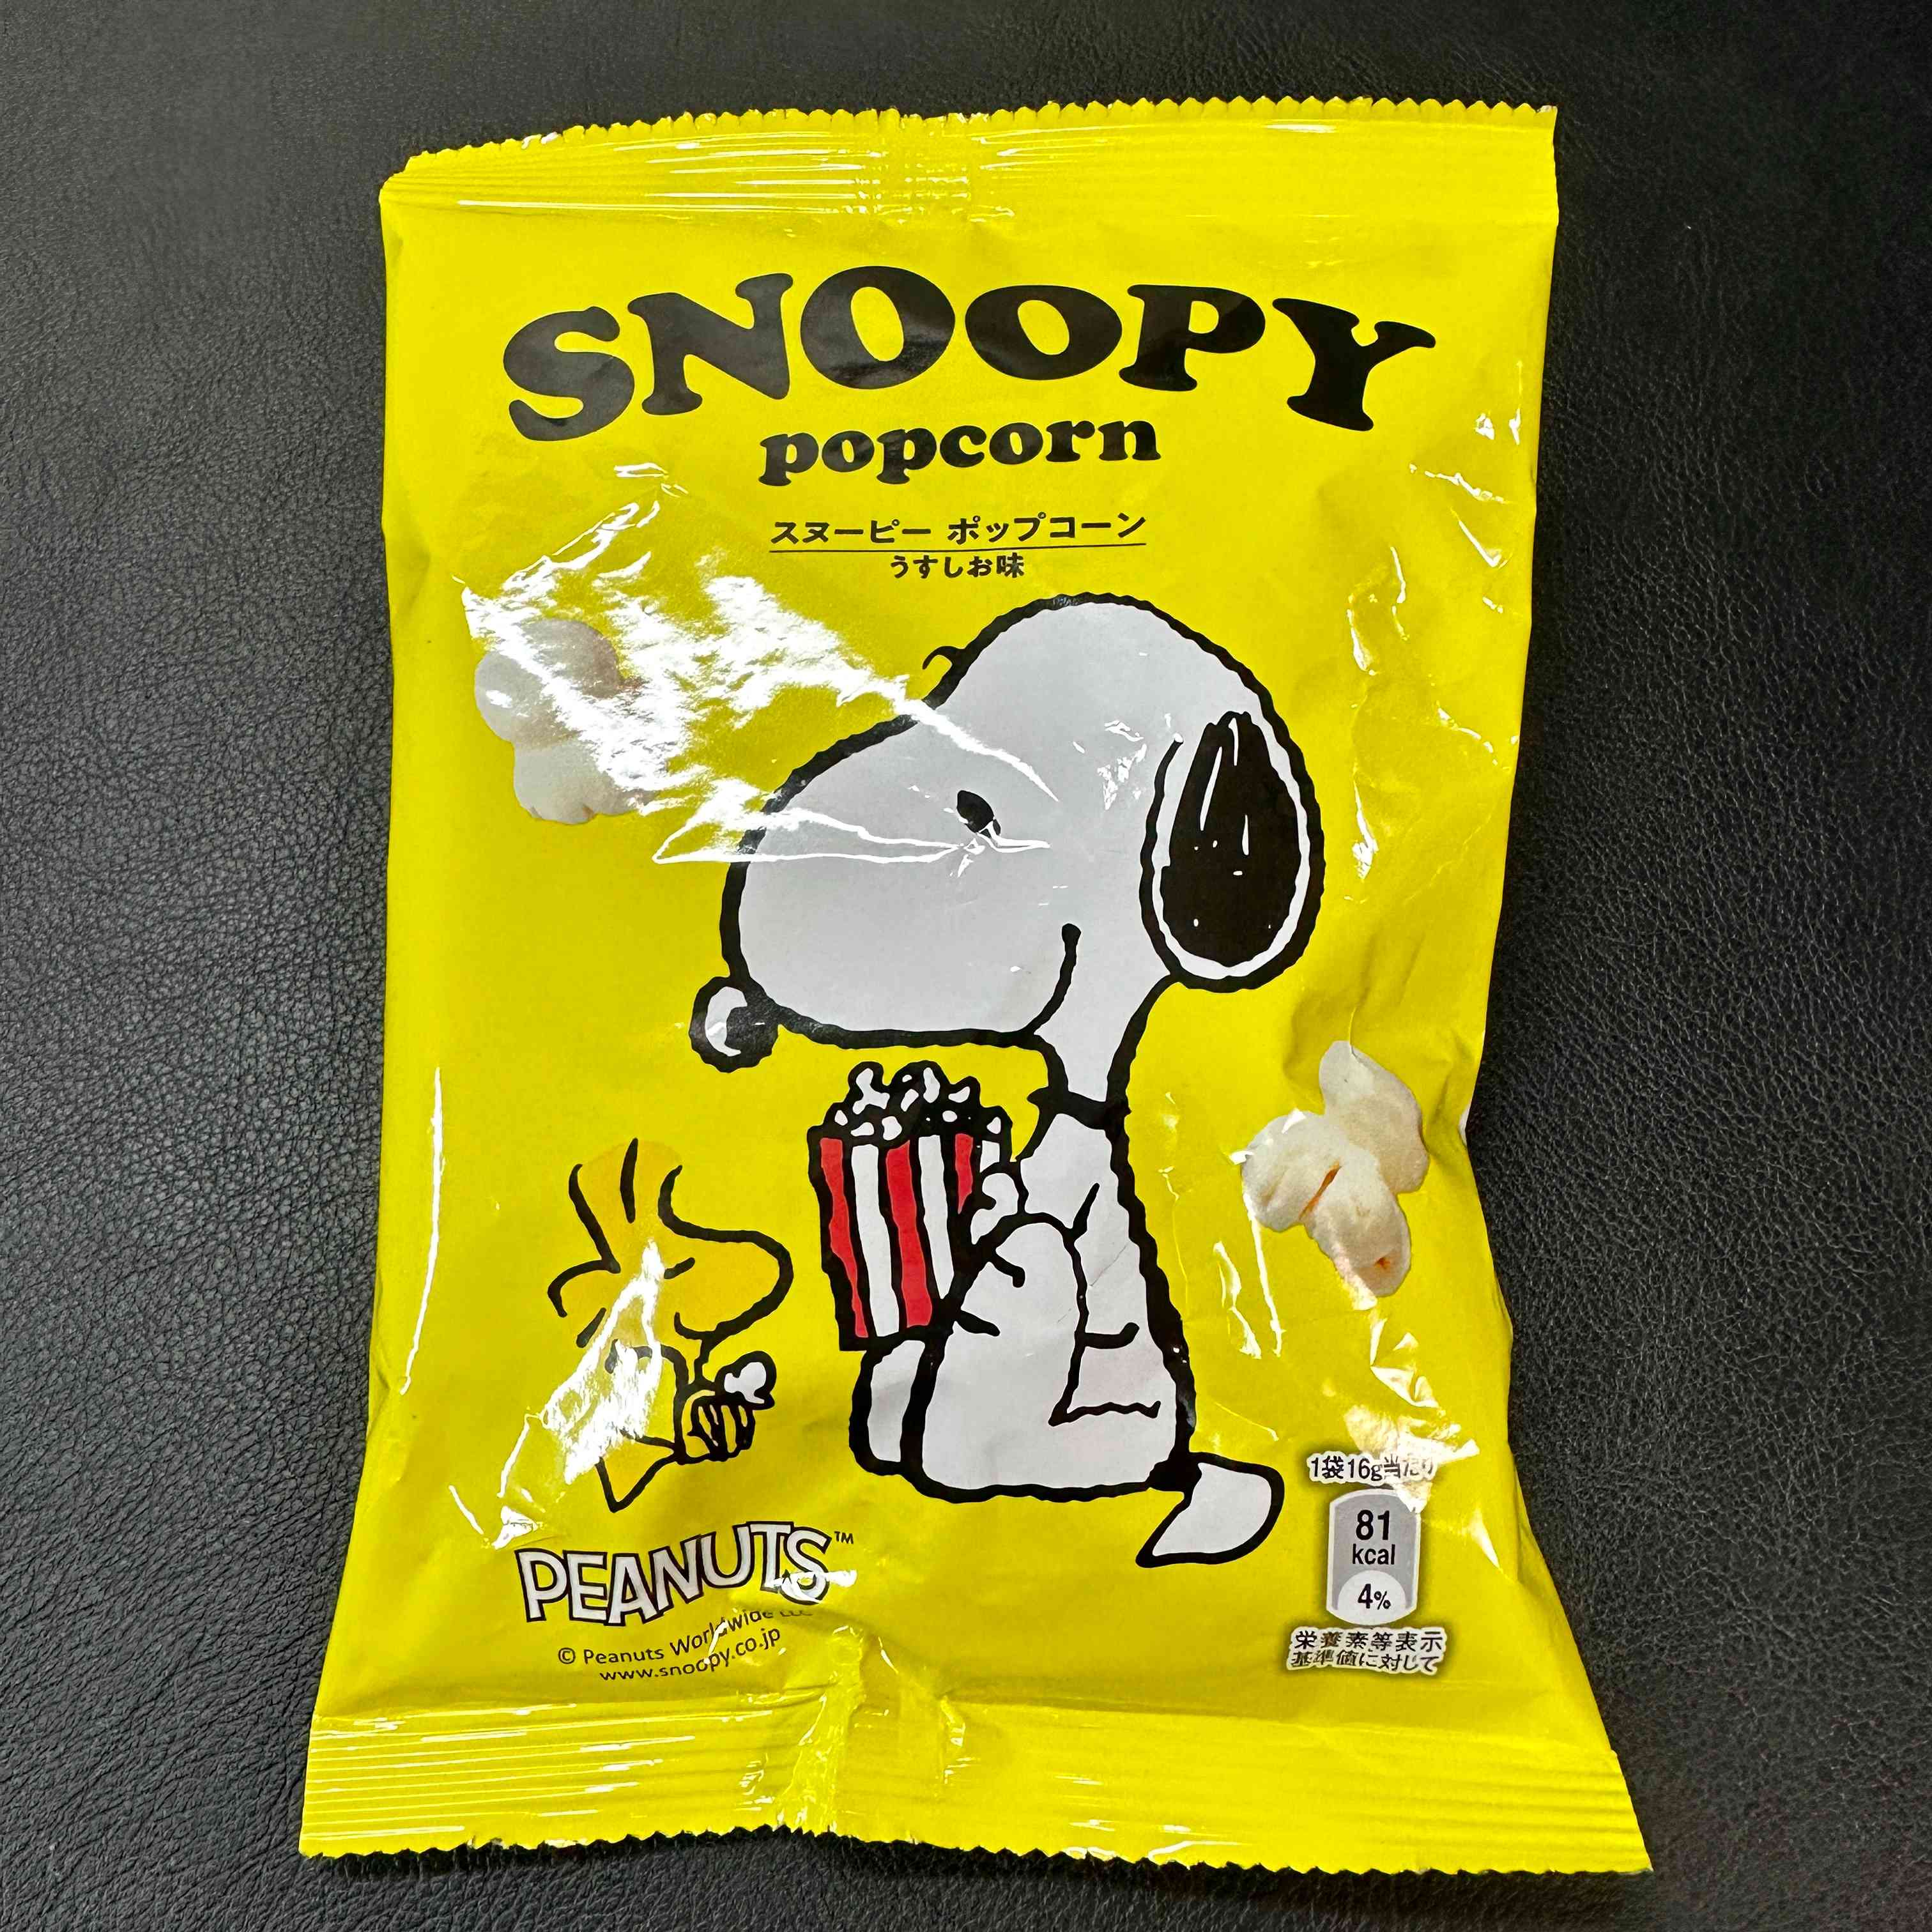 【FritoLay】Snoopy Popcorn - Lightly Salted Flavor　1bag　16ｇ